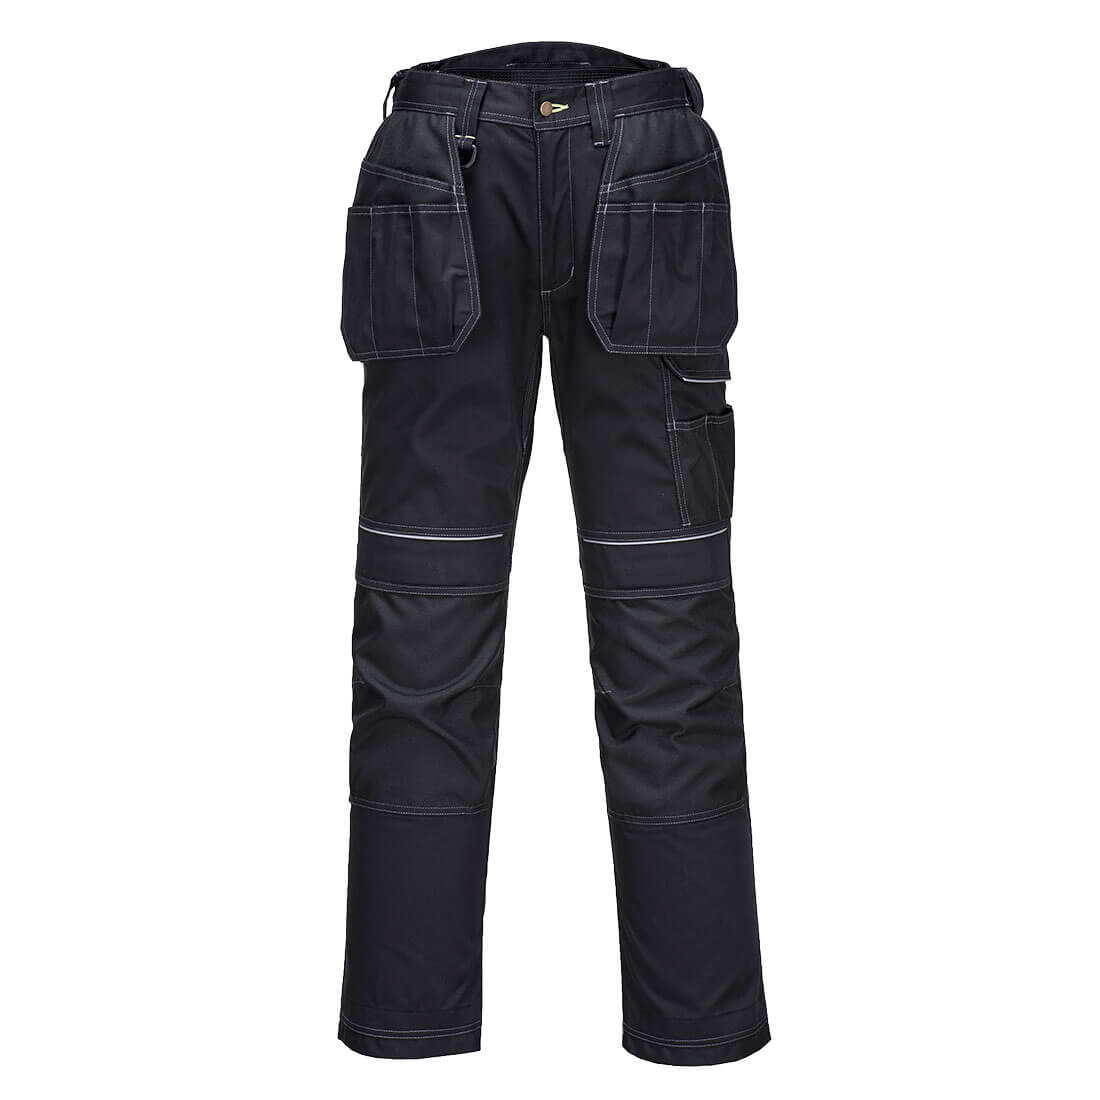 Portwest PW357 - PW3 Lined Winter Holster Trousers